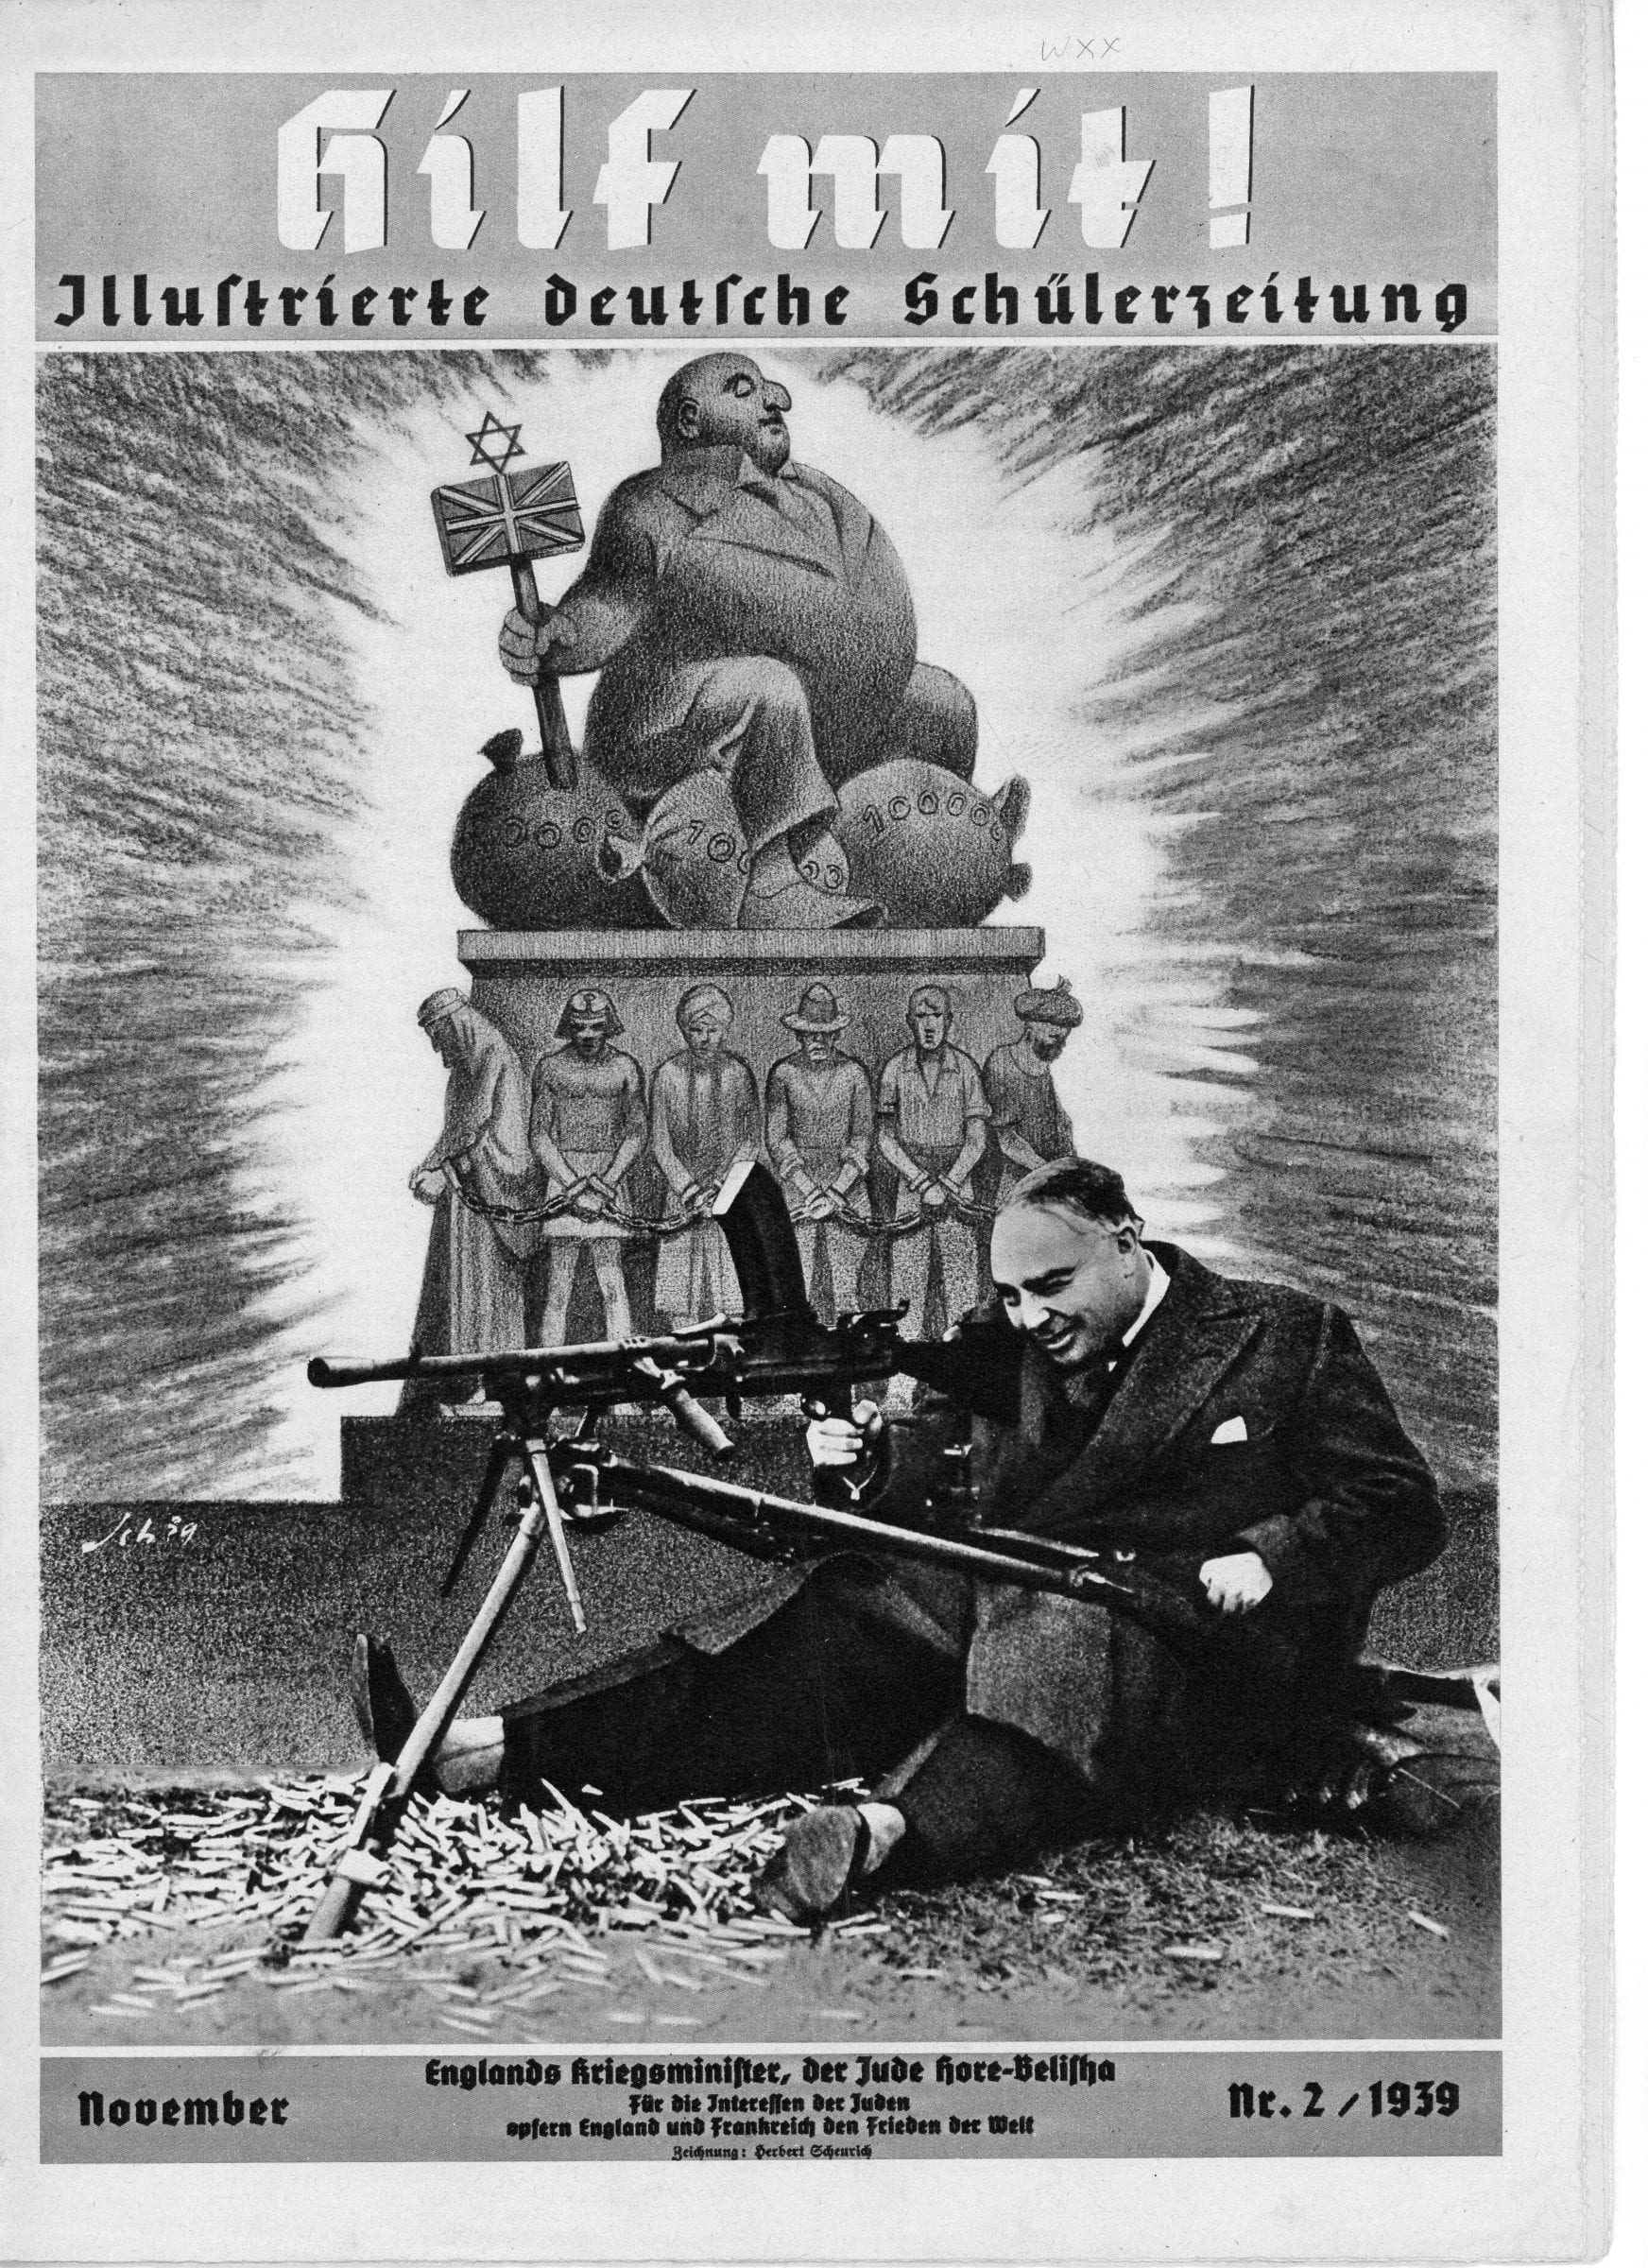 1939 German magazine showing English Jew sitting on bags of money above poor chained people